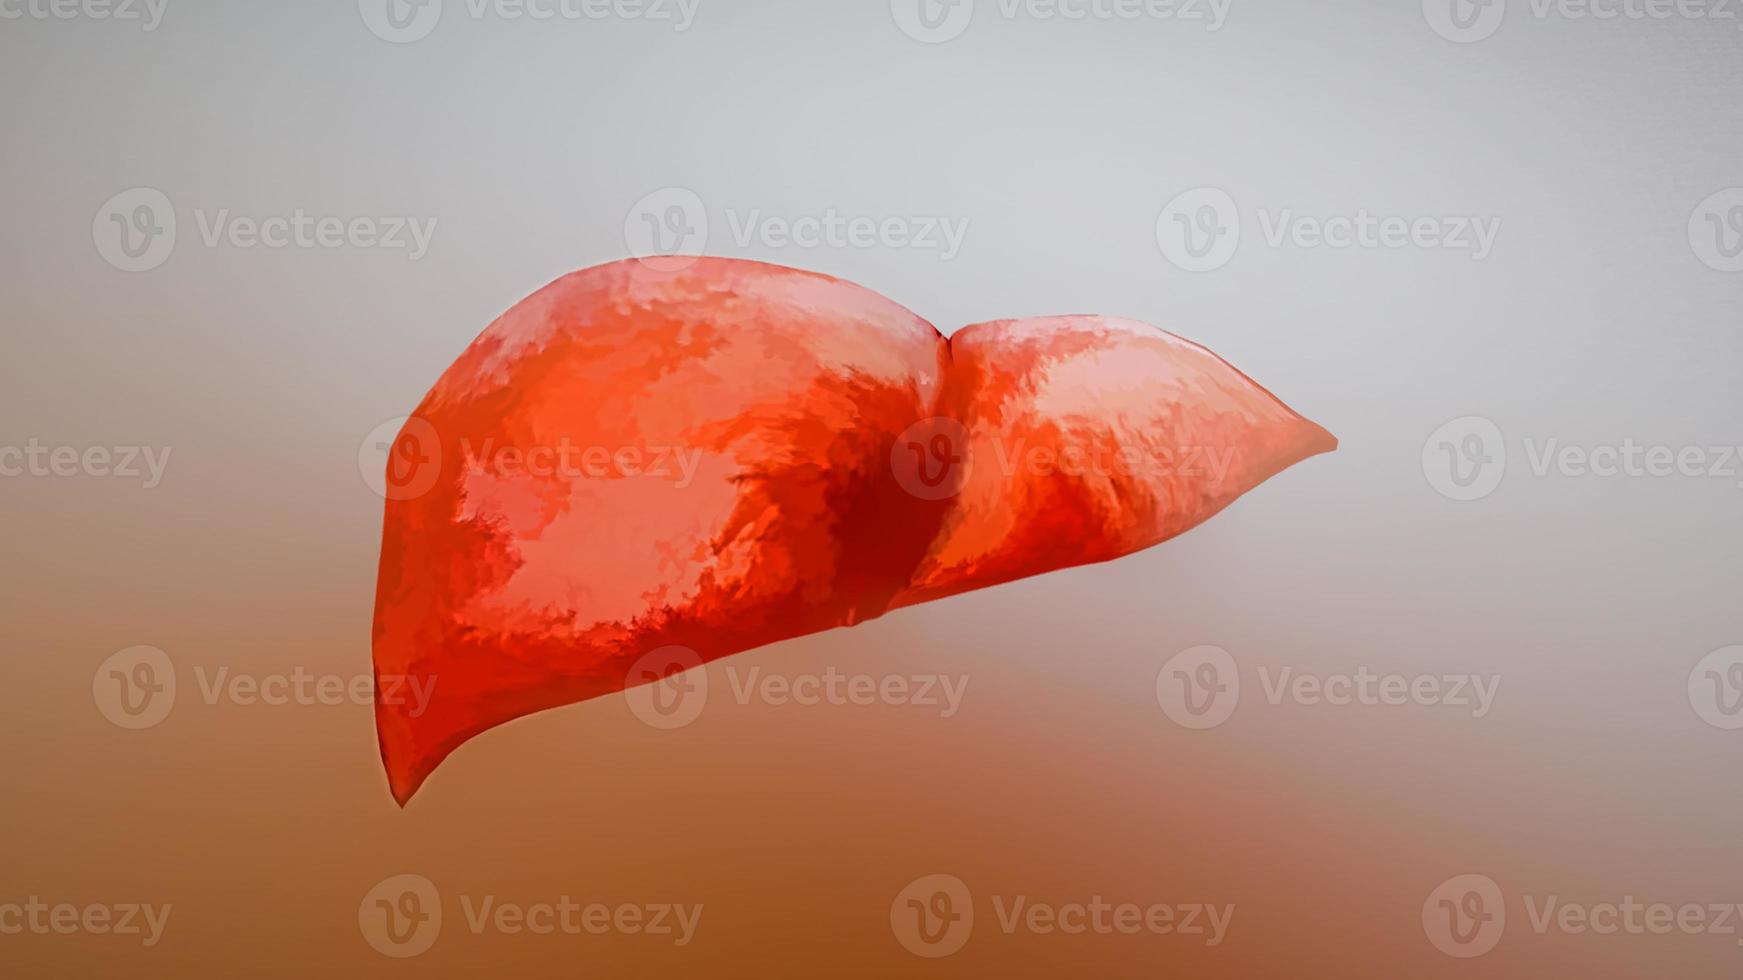 Realistic anatomical model of healthy human liver. 3D illustration photo